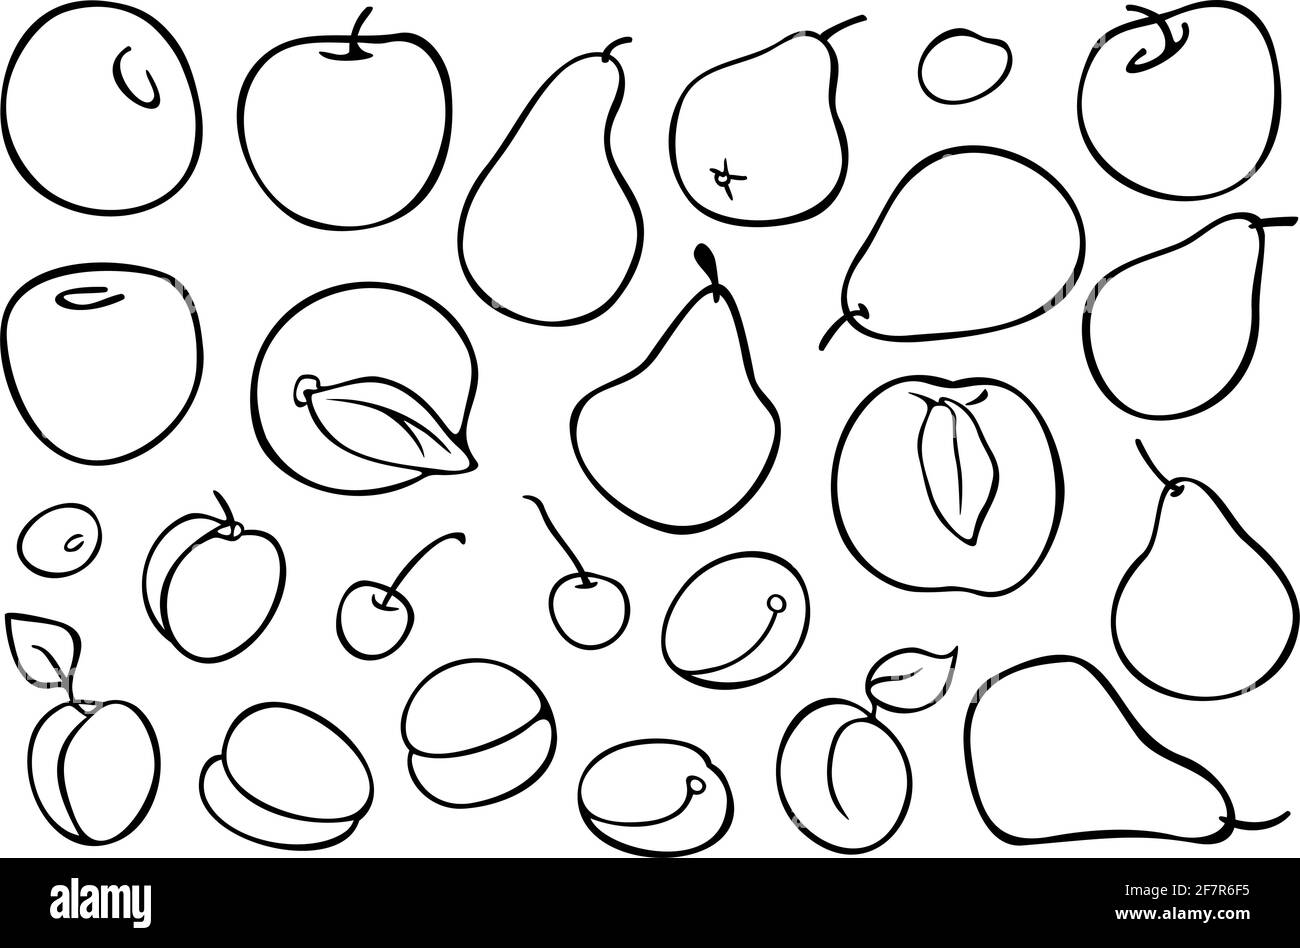 Big vector set with apricot fruits. Design for coloring book ...